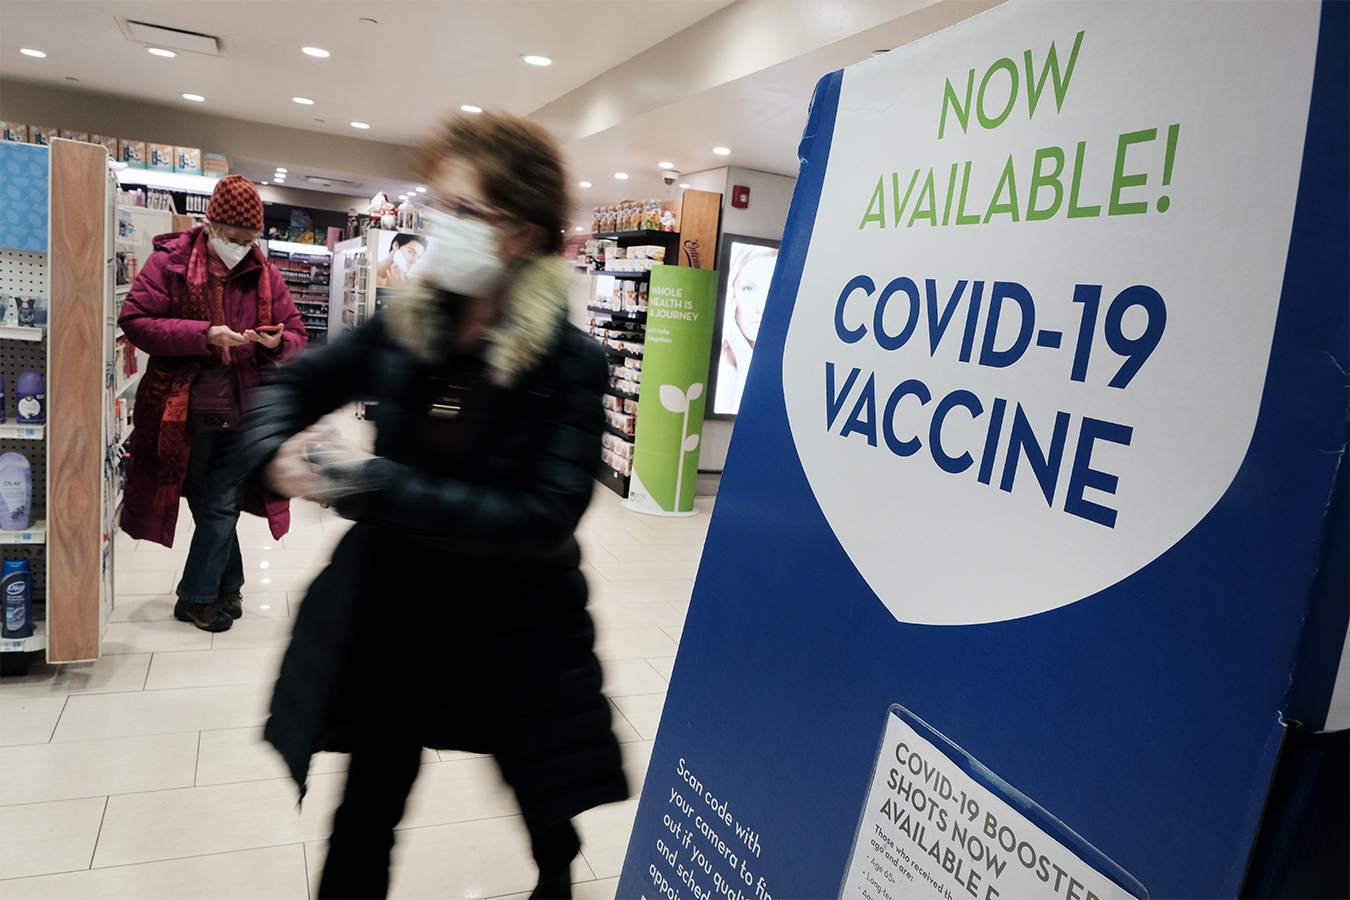 Pharmacies Are Turning Away Immunocompromised Patients Trying to find 4th Covid Shot